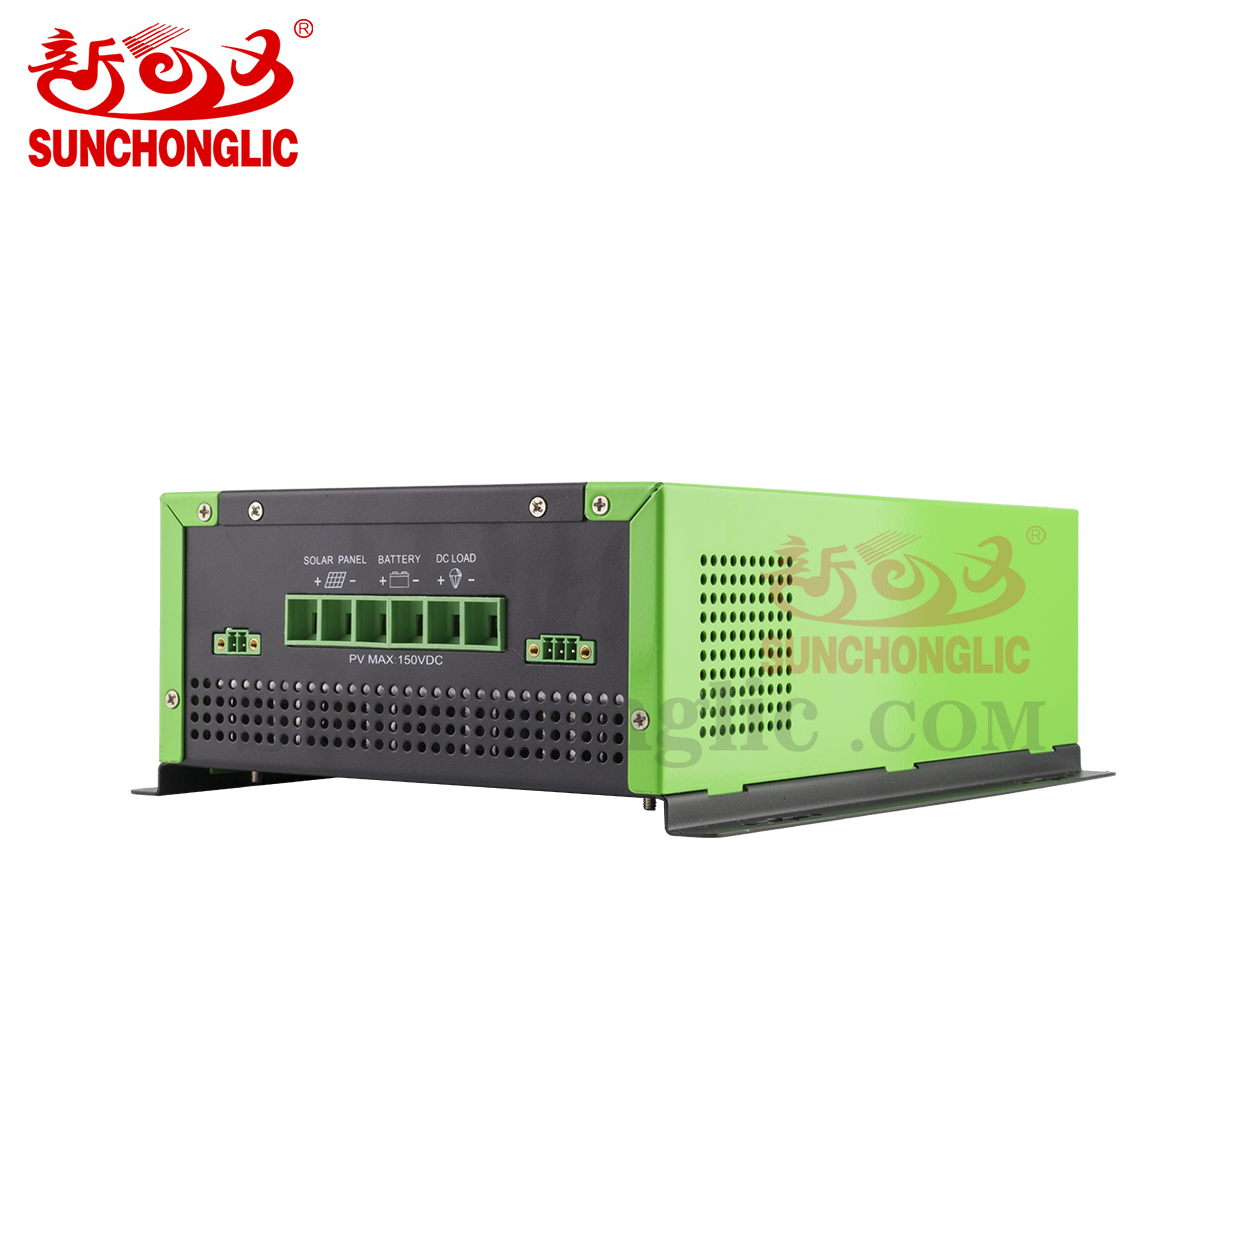 MPPT Solar Charge Controller - FT-MP-40A